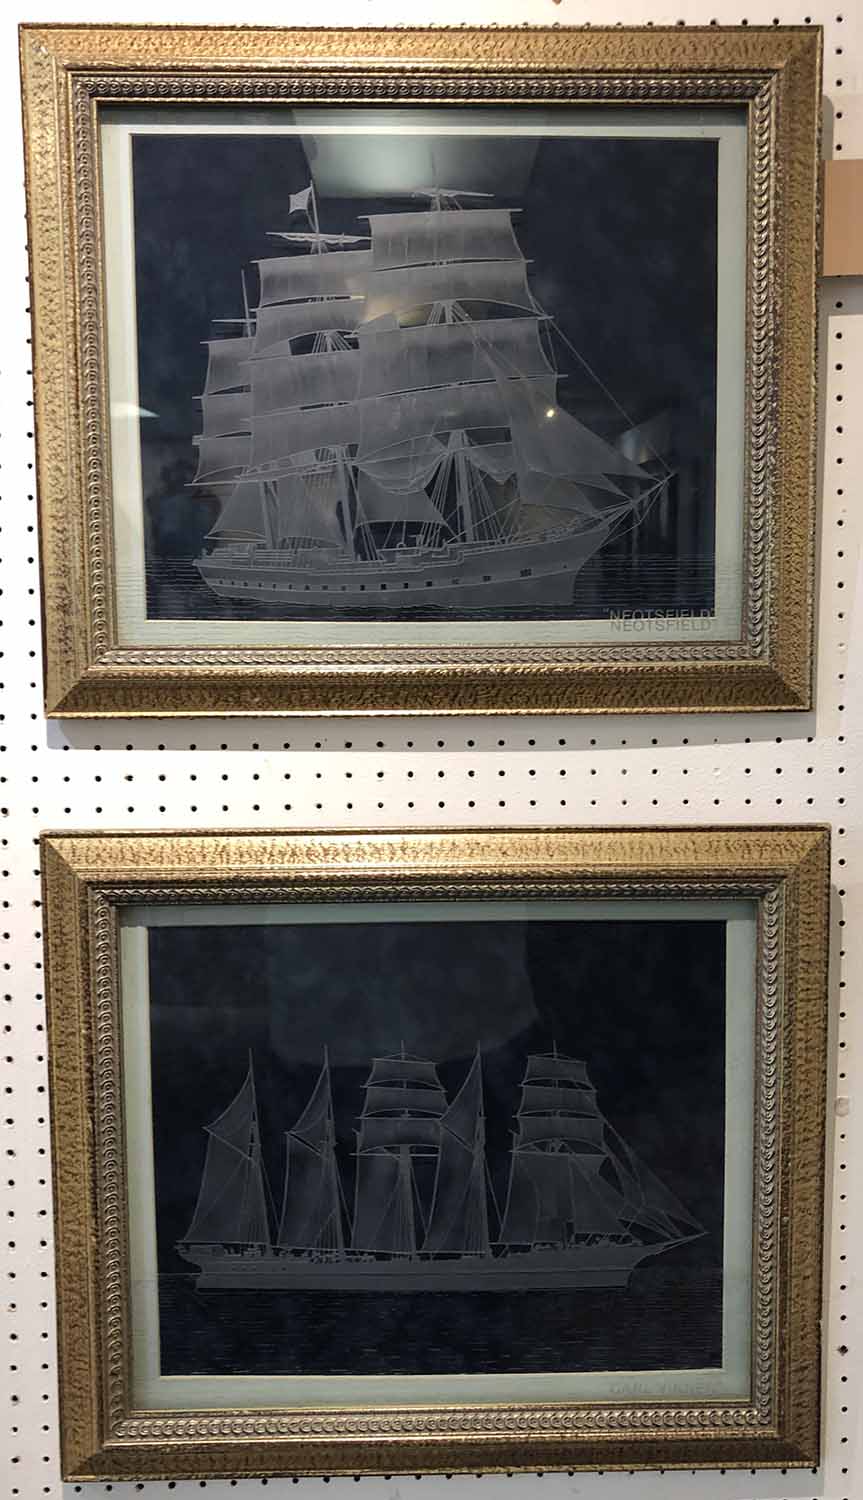 MARITIME SCHOOL 'Neotsfield' and 'Carl Vinnen', ship portraits on etched glass, 30cm x 37cm, framed. - Image 3 of 3